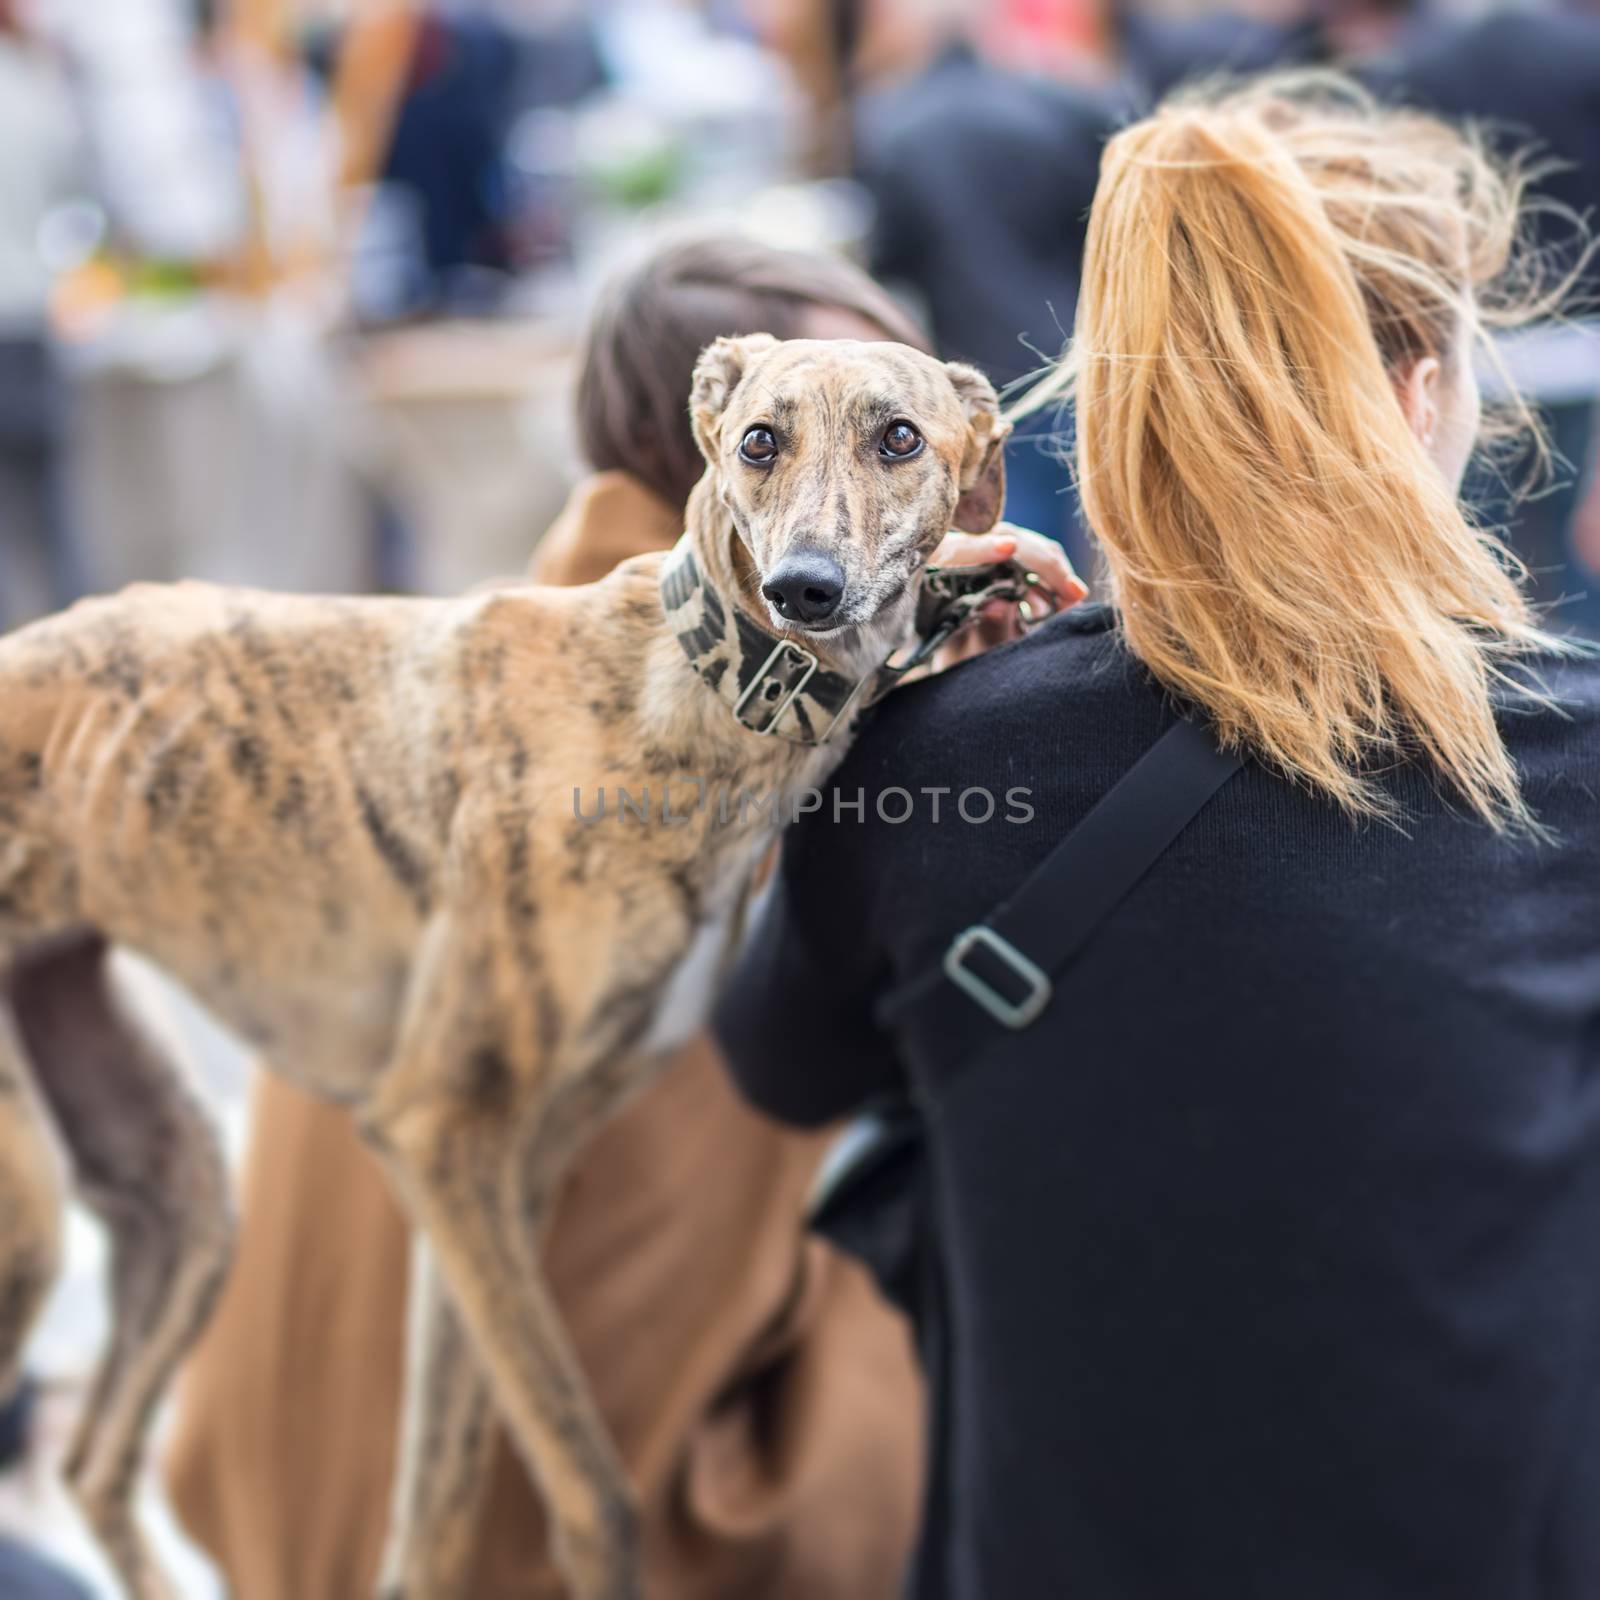 Italian Greyhound dog with his female owner on urban street event.